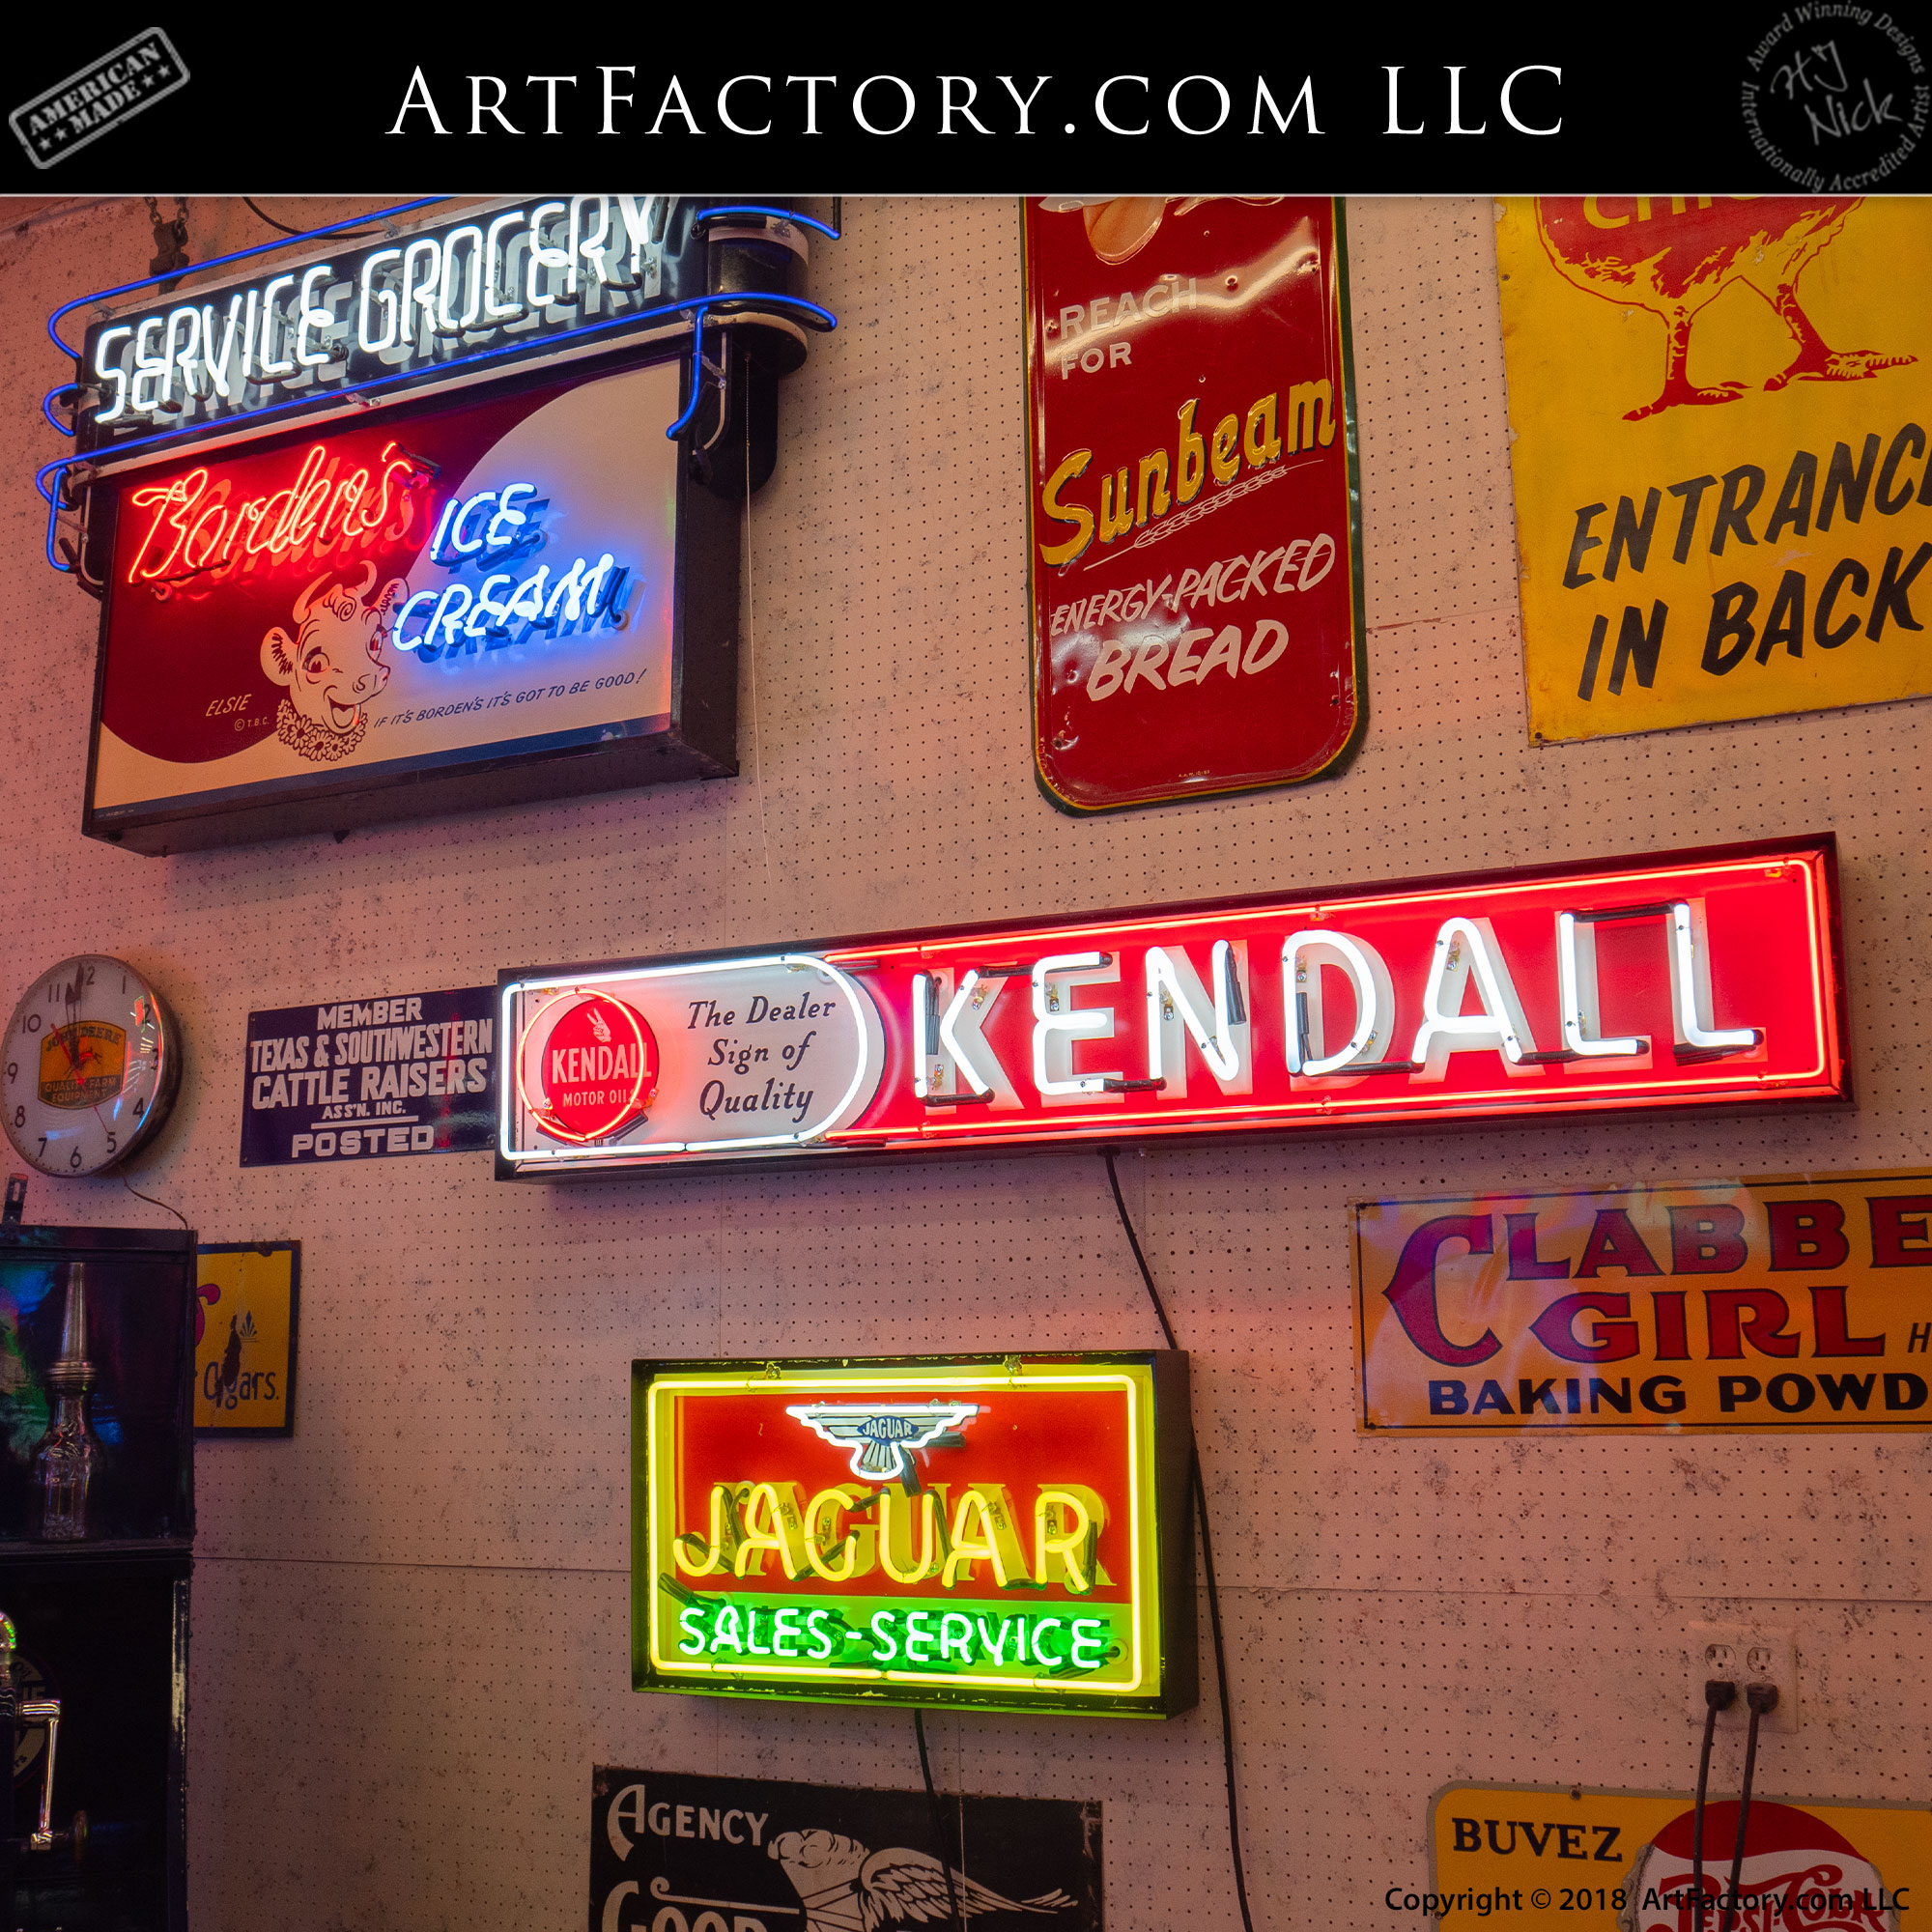 New Vintage Kendall Motor Oil Neon Sign